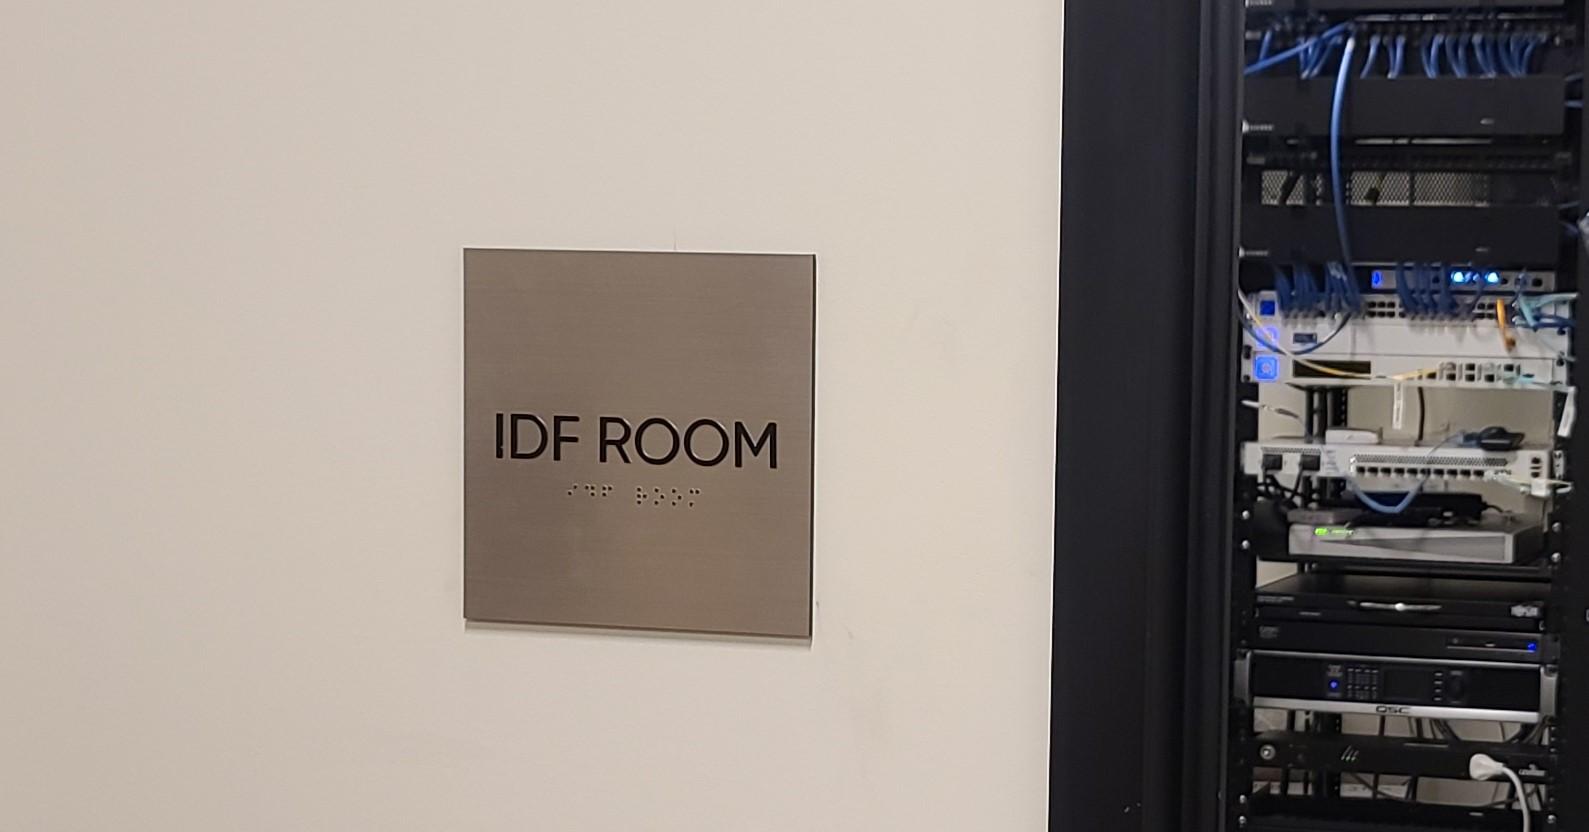 ADA sign with braille. These ADA directional signs with braille for Simple Practice will enhance their Santa Monica office by providing visual and tactile displays outlining various areas such as their IDF and copy rooms.